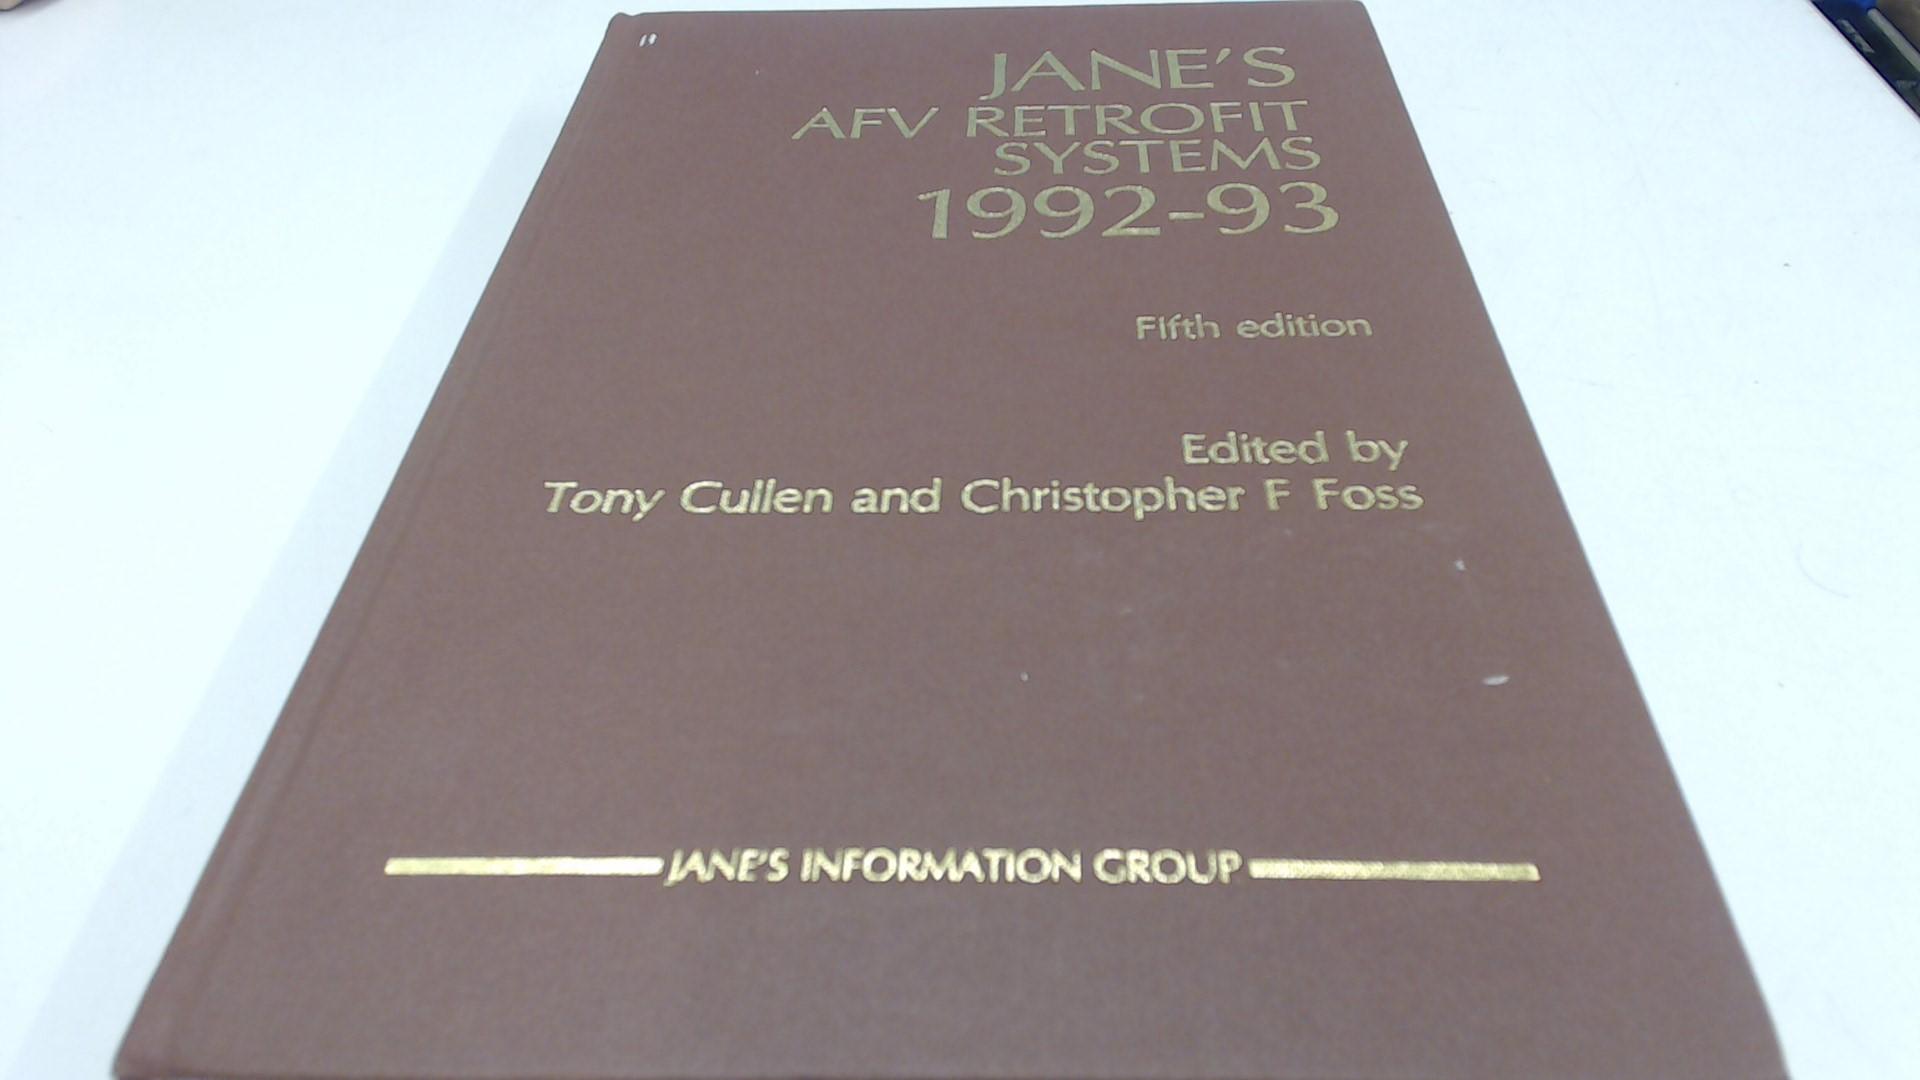 Janes Armoured Fighting Vehicle Retrofit Systems 1992-93 - Tony Cullen & Christopher F Ross (eds)